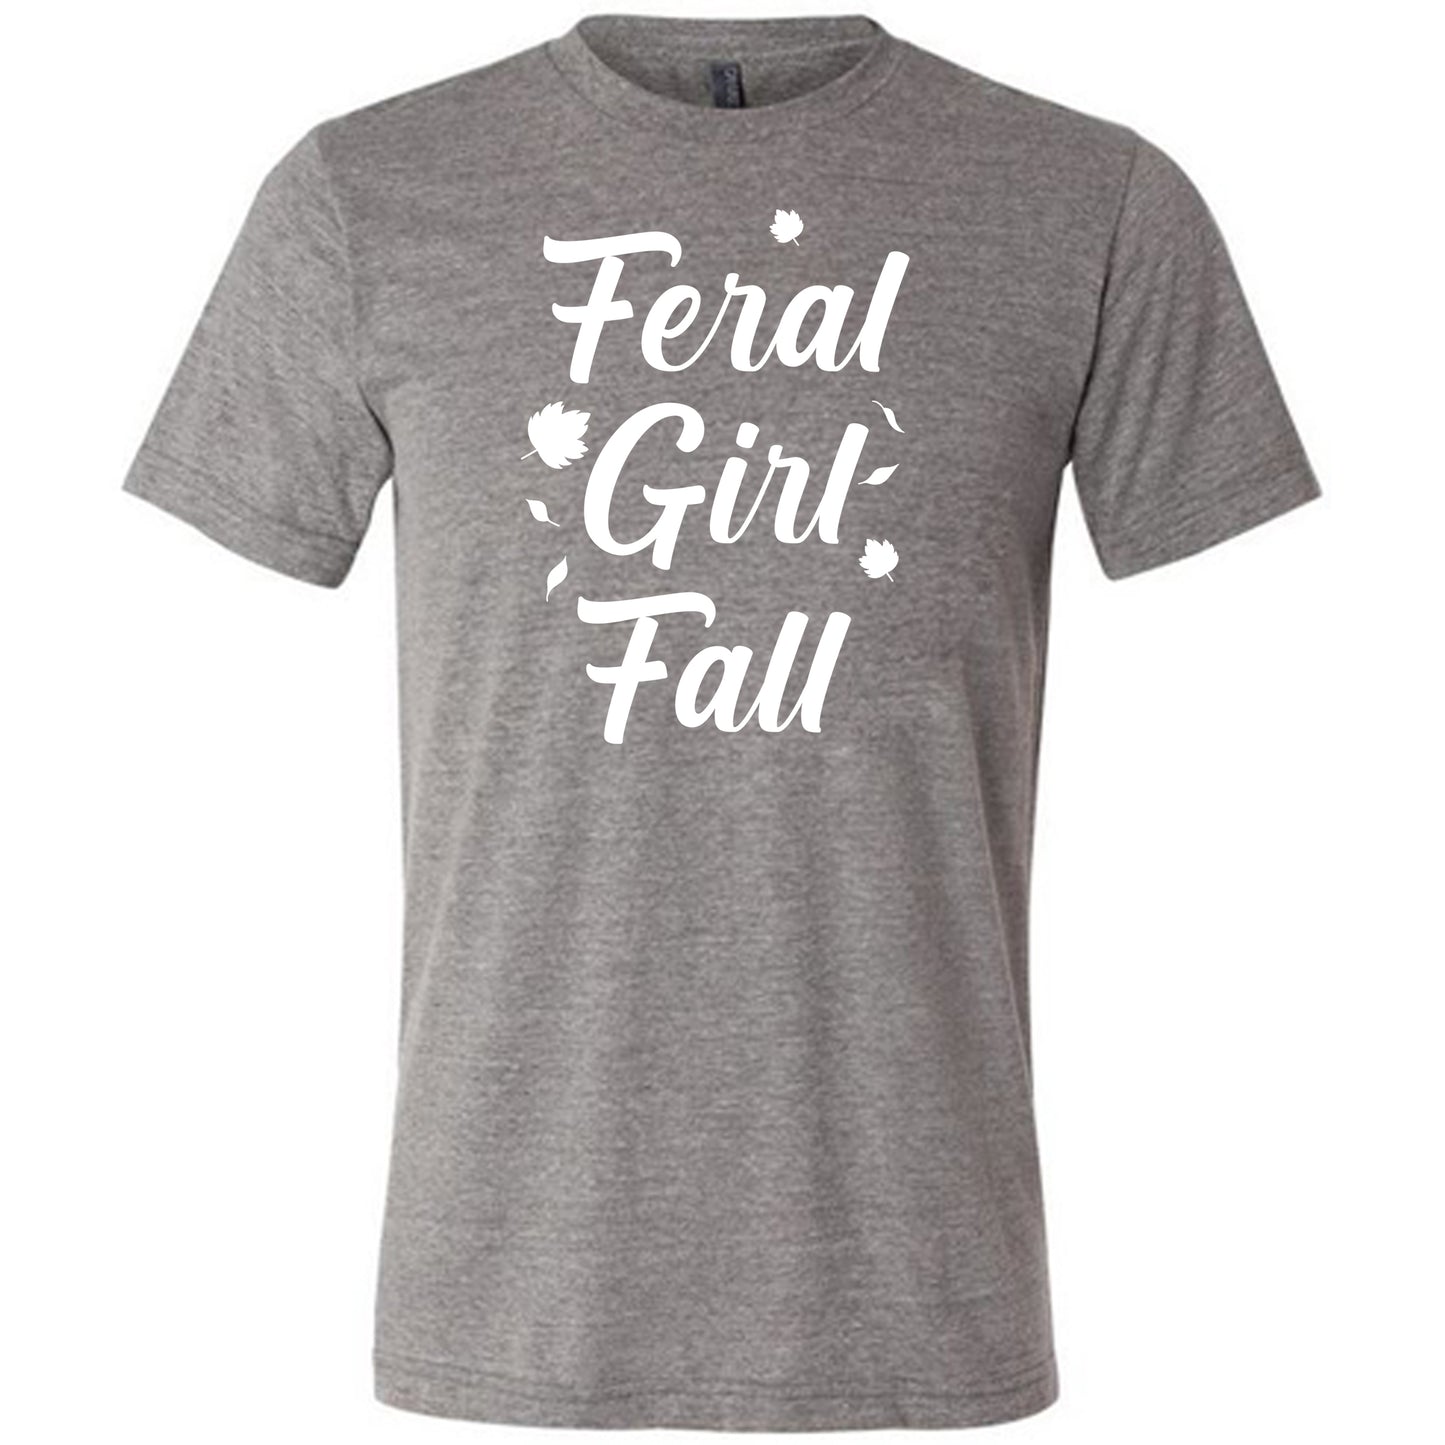 white quote "Feral Girl Fall" on a grey shirt